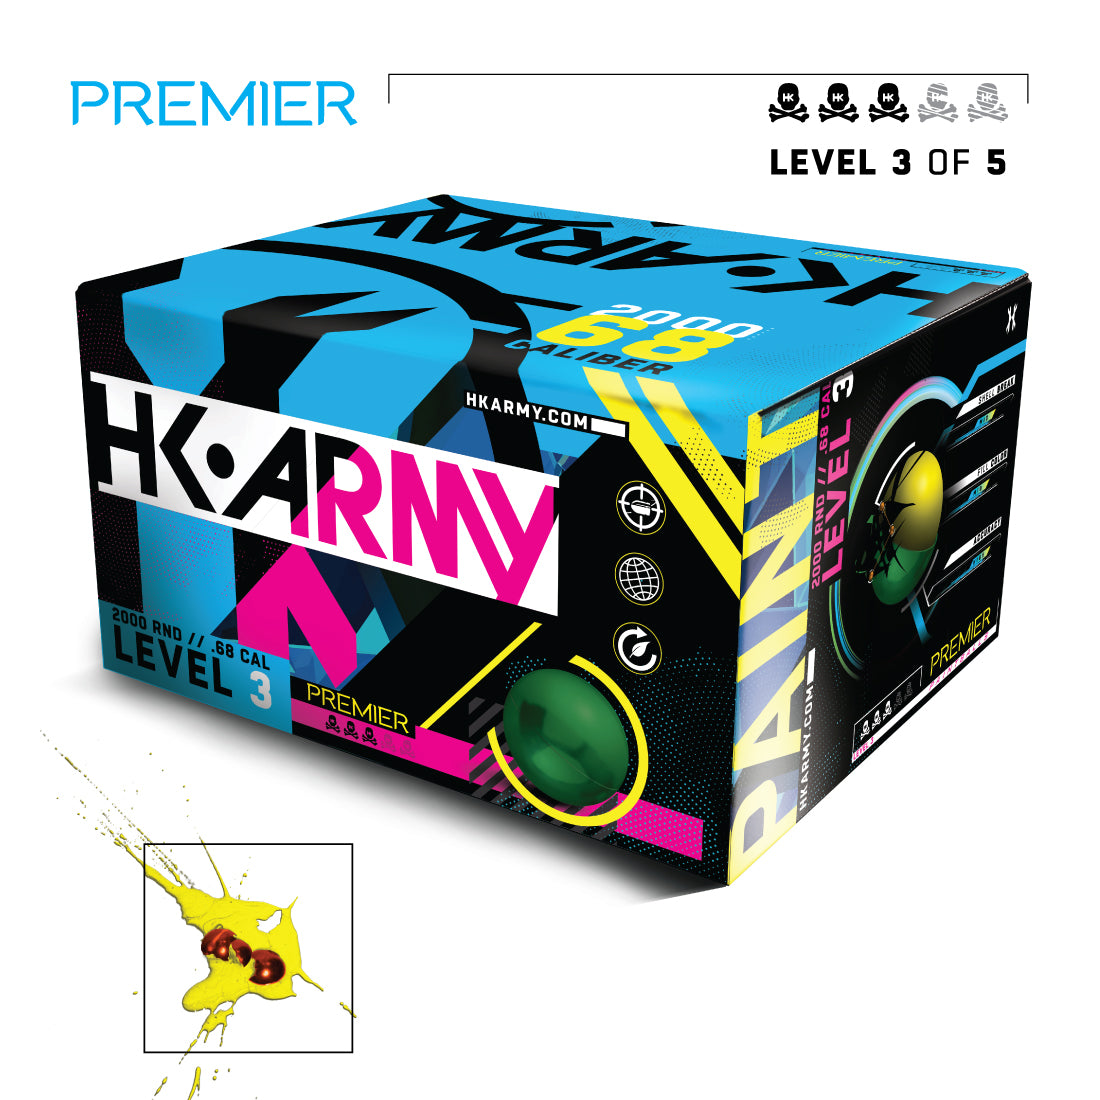 HK Army Select 1,000 Round Paintballs - White Fill ( .68 Caliber )